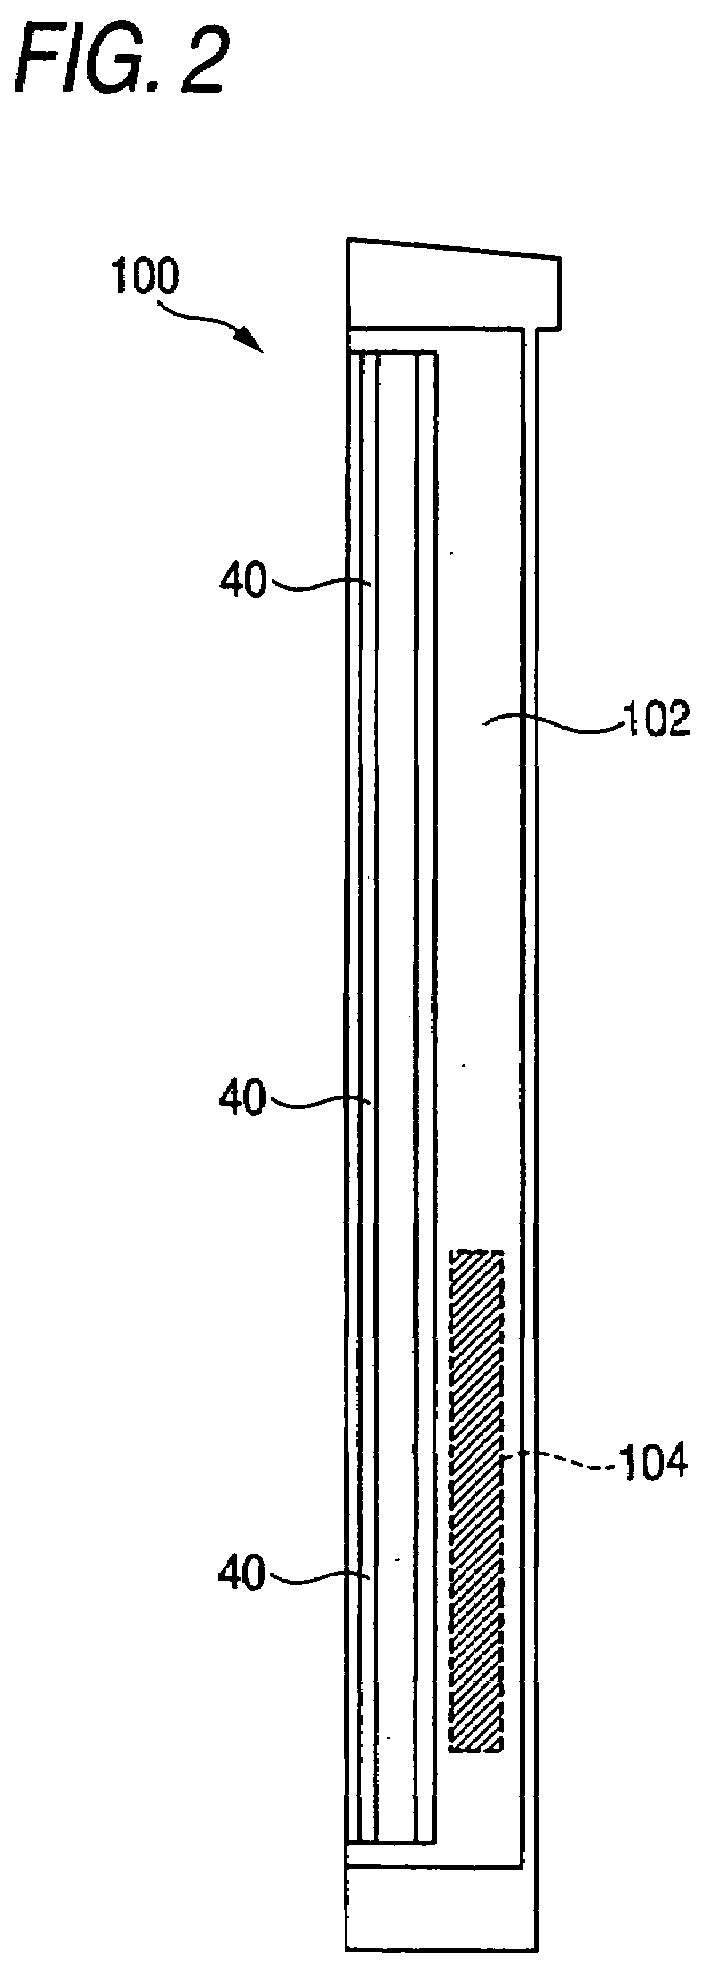 Large-sized display apparatus and display device and display module used in large-sized display apparatus